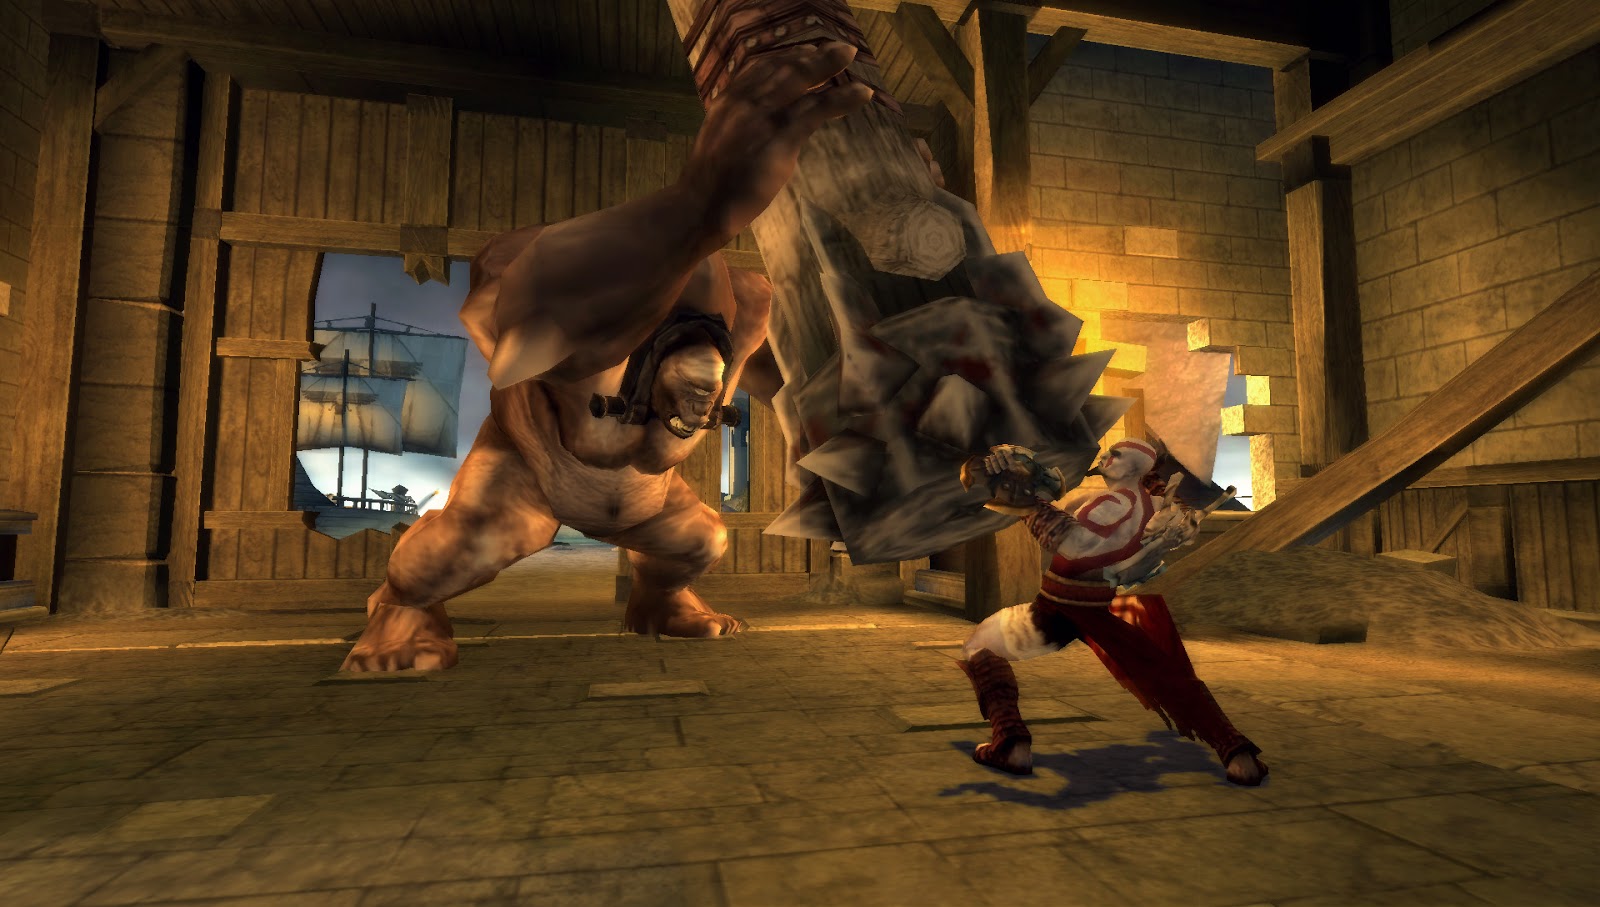 God Of War - Chains of Olympus For Android Mobile, Max Healthand Magic, Offline Ppsspp